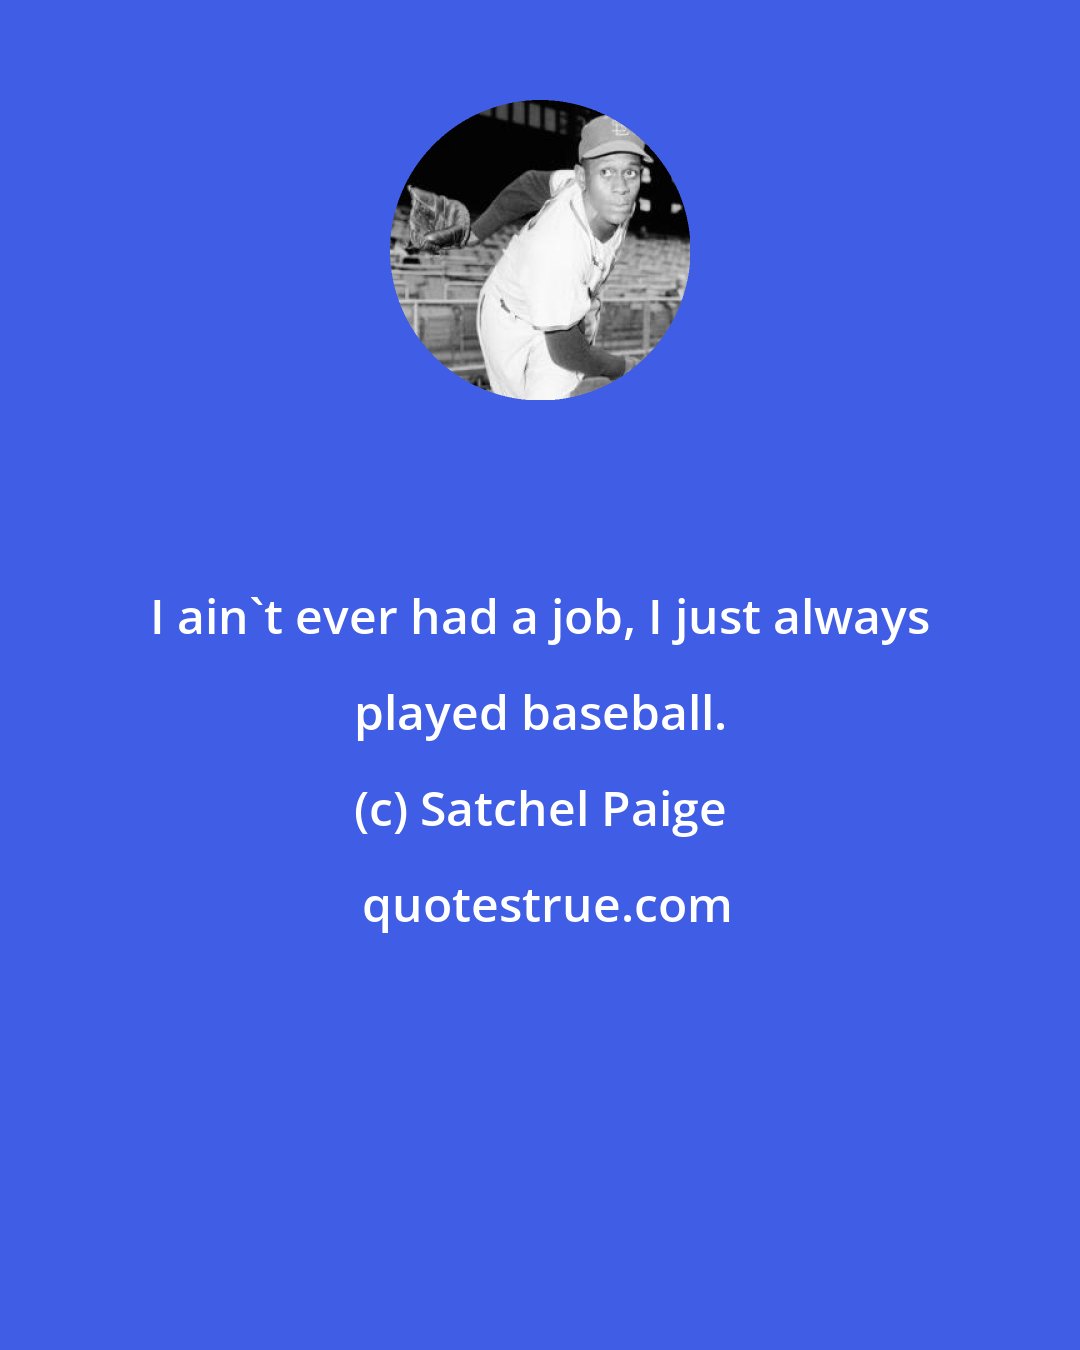 Satchel Paige: I ain't ever had a job, I just always played baseball.